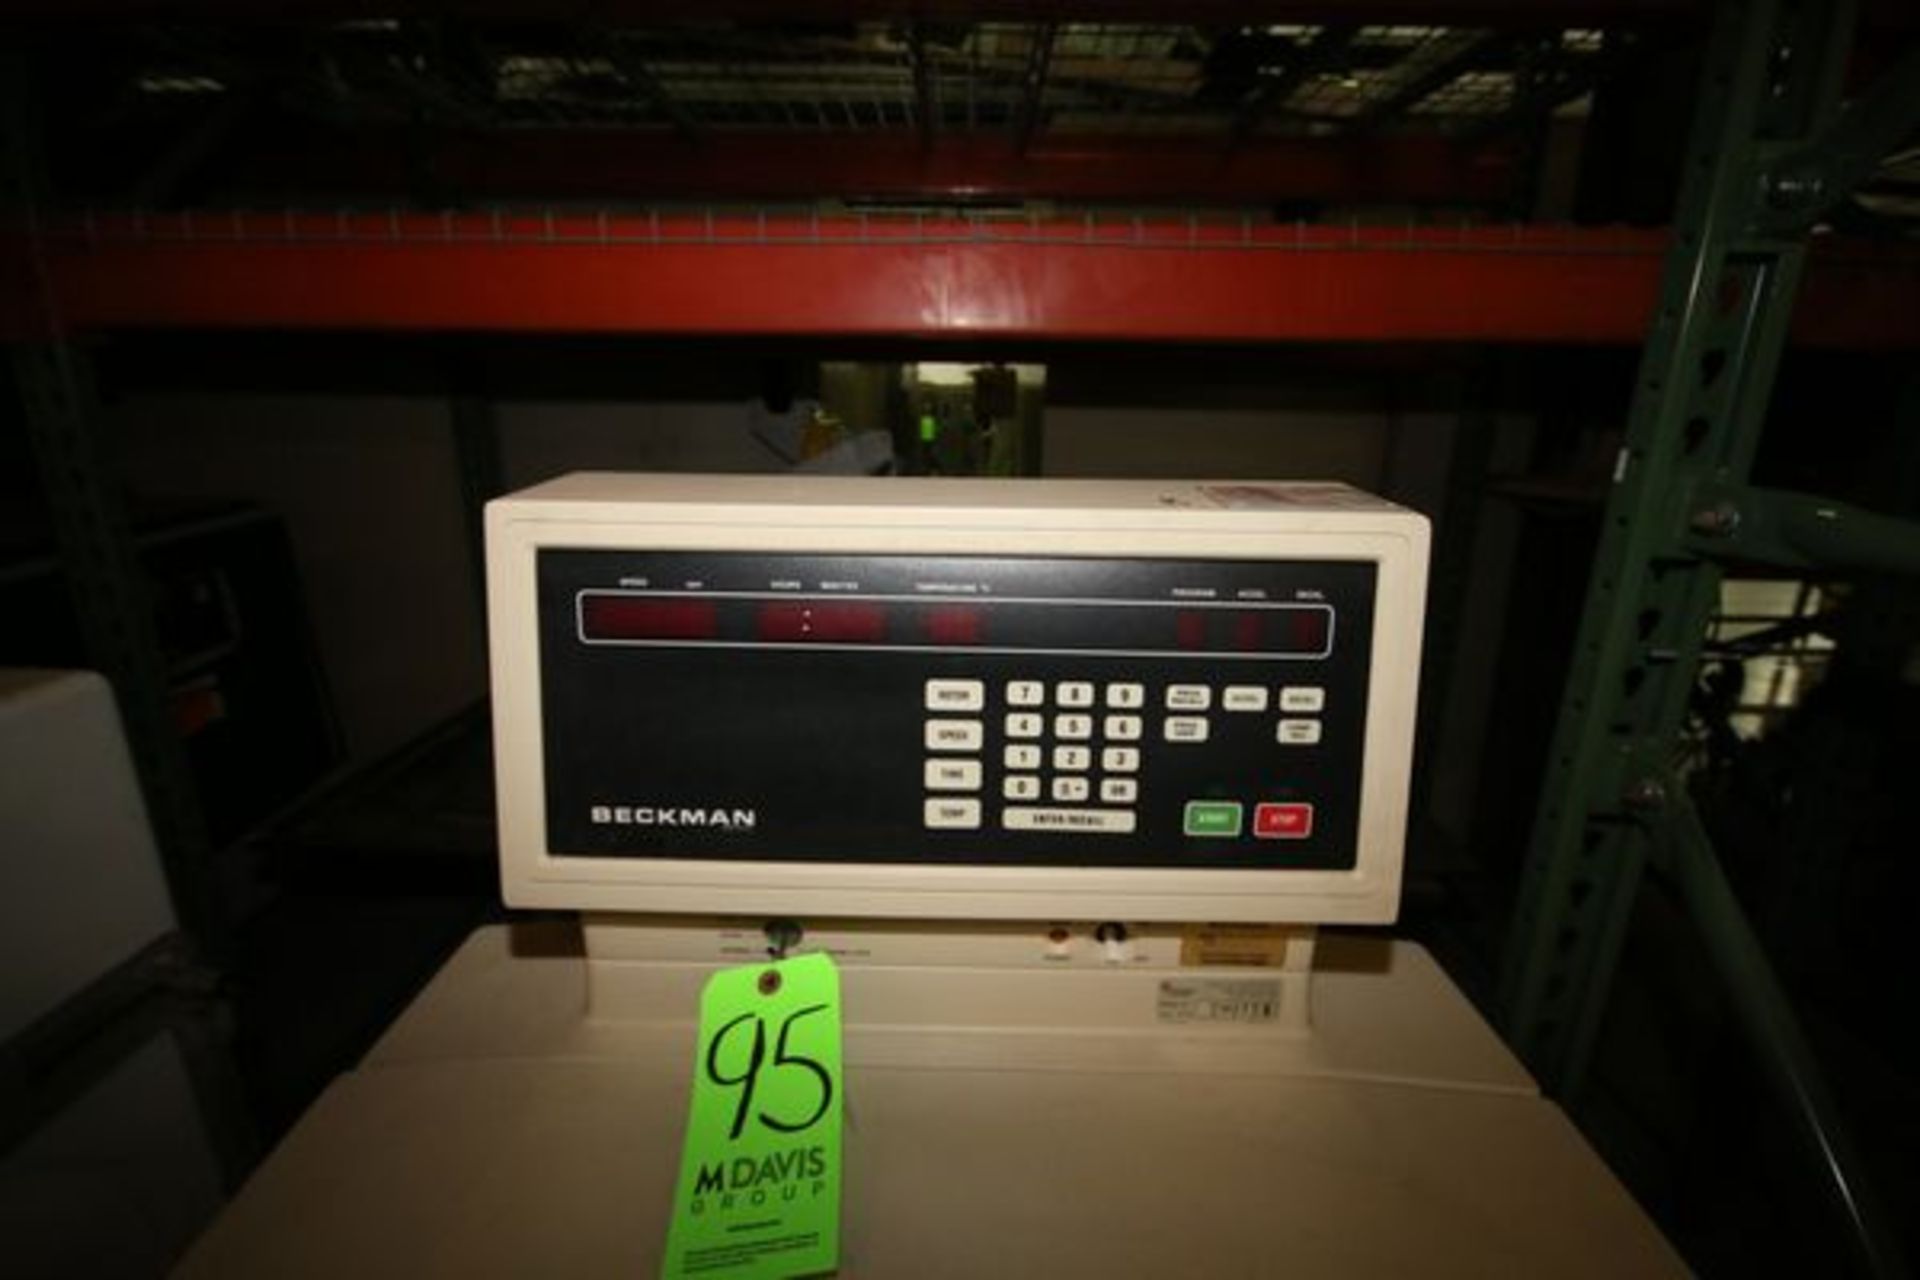 Beckman J2-21M/E Centrifuge, S/N J2K815, Overall Dimensions: 32" L x 28" W x 51 1/2" H - Image 2 of 3